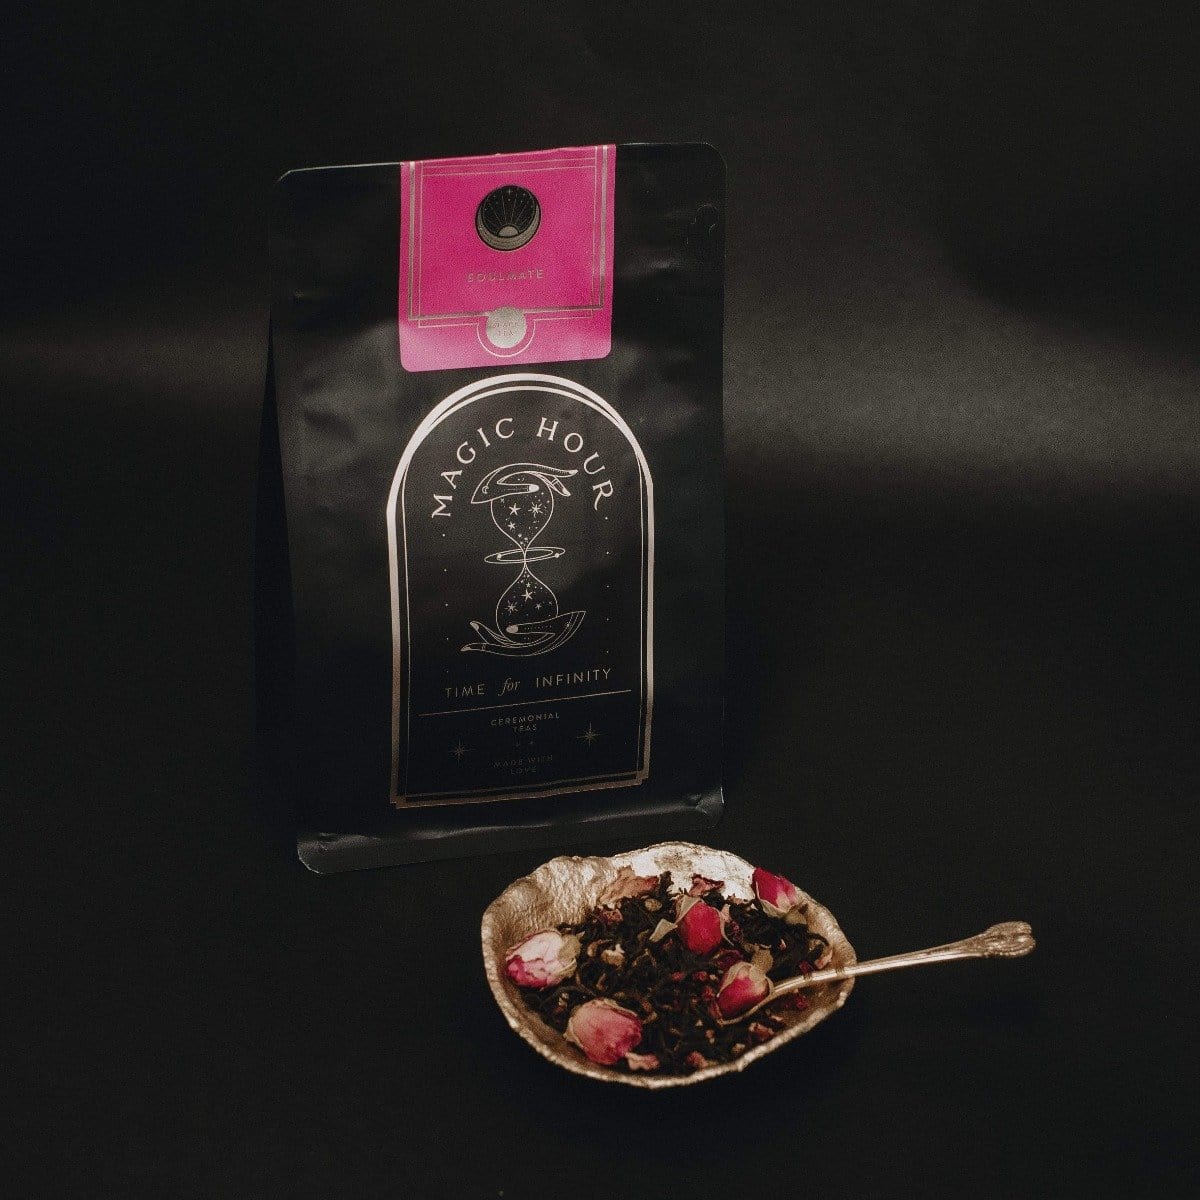 A package of Magic Hour Tea &quot;Soulmate: Chocolate-Raspberry-Rose Black Tea for Finding &amp; Celebrating Love&quot; with a pink label sits against a dark background. In front, a decorative bowl brims with organic tea leaves and dried rosebuds, while a small spoon rests on the bowl.